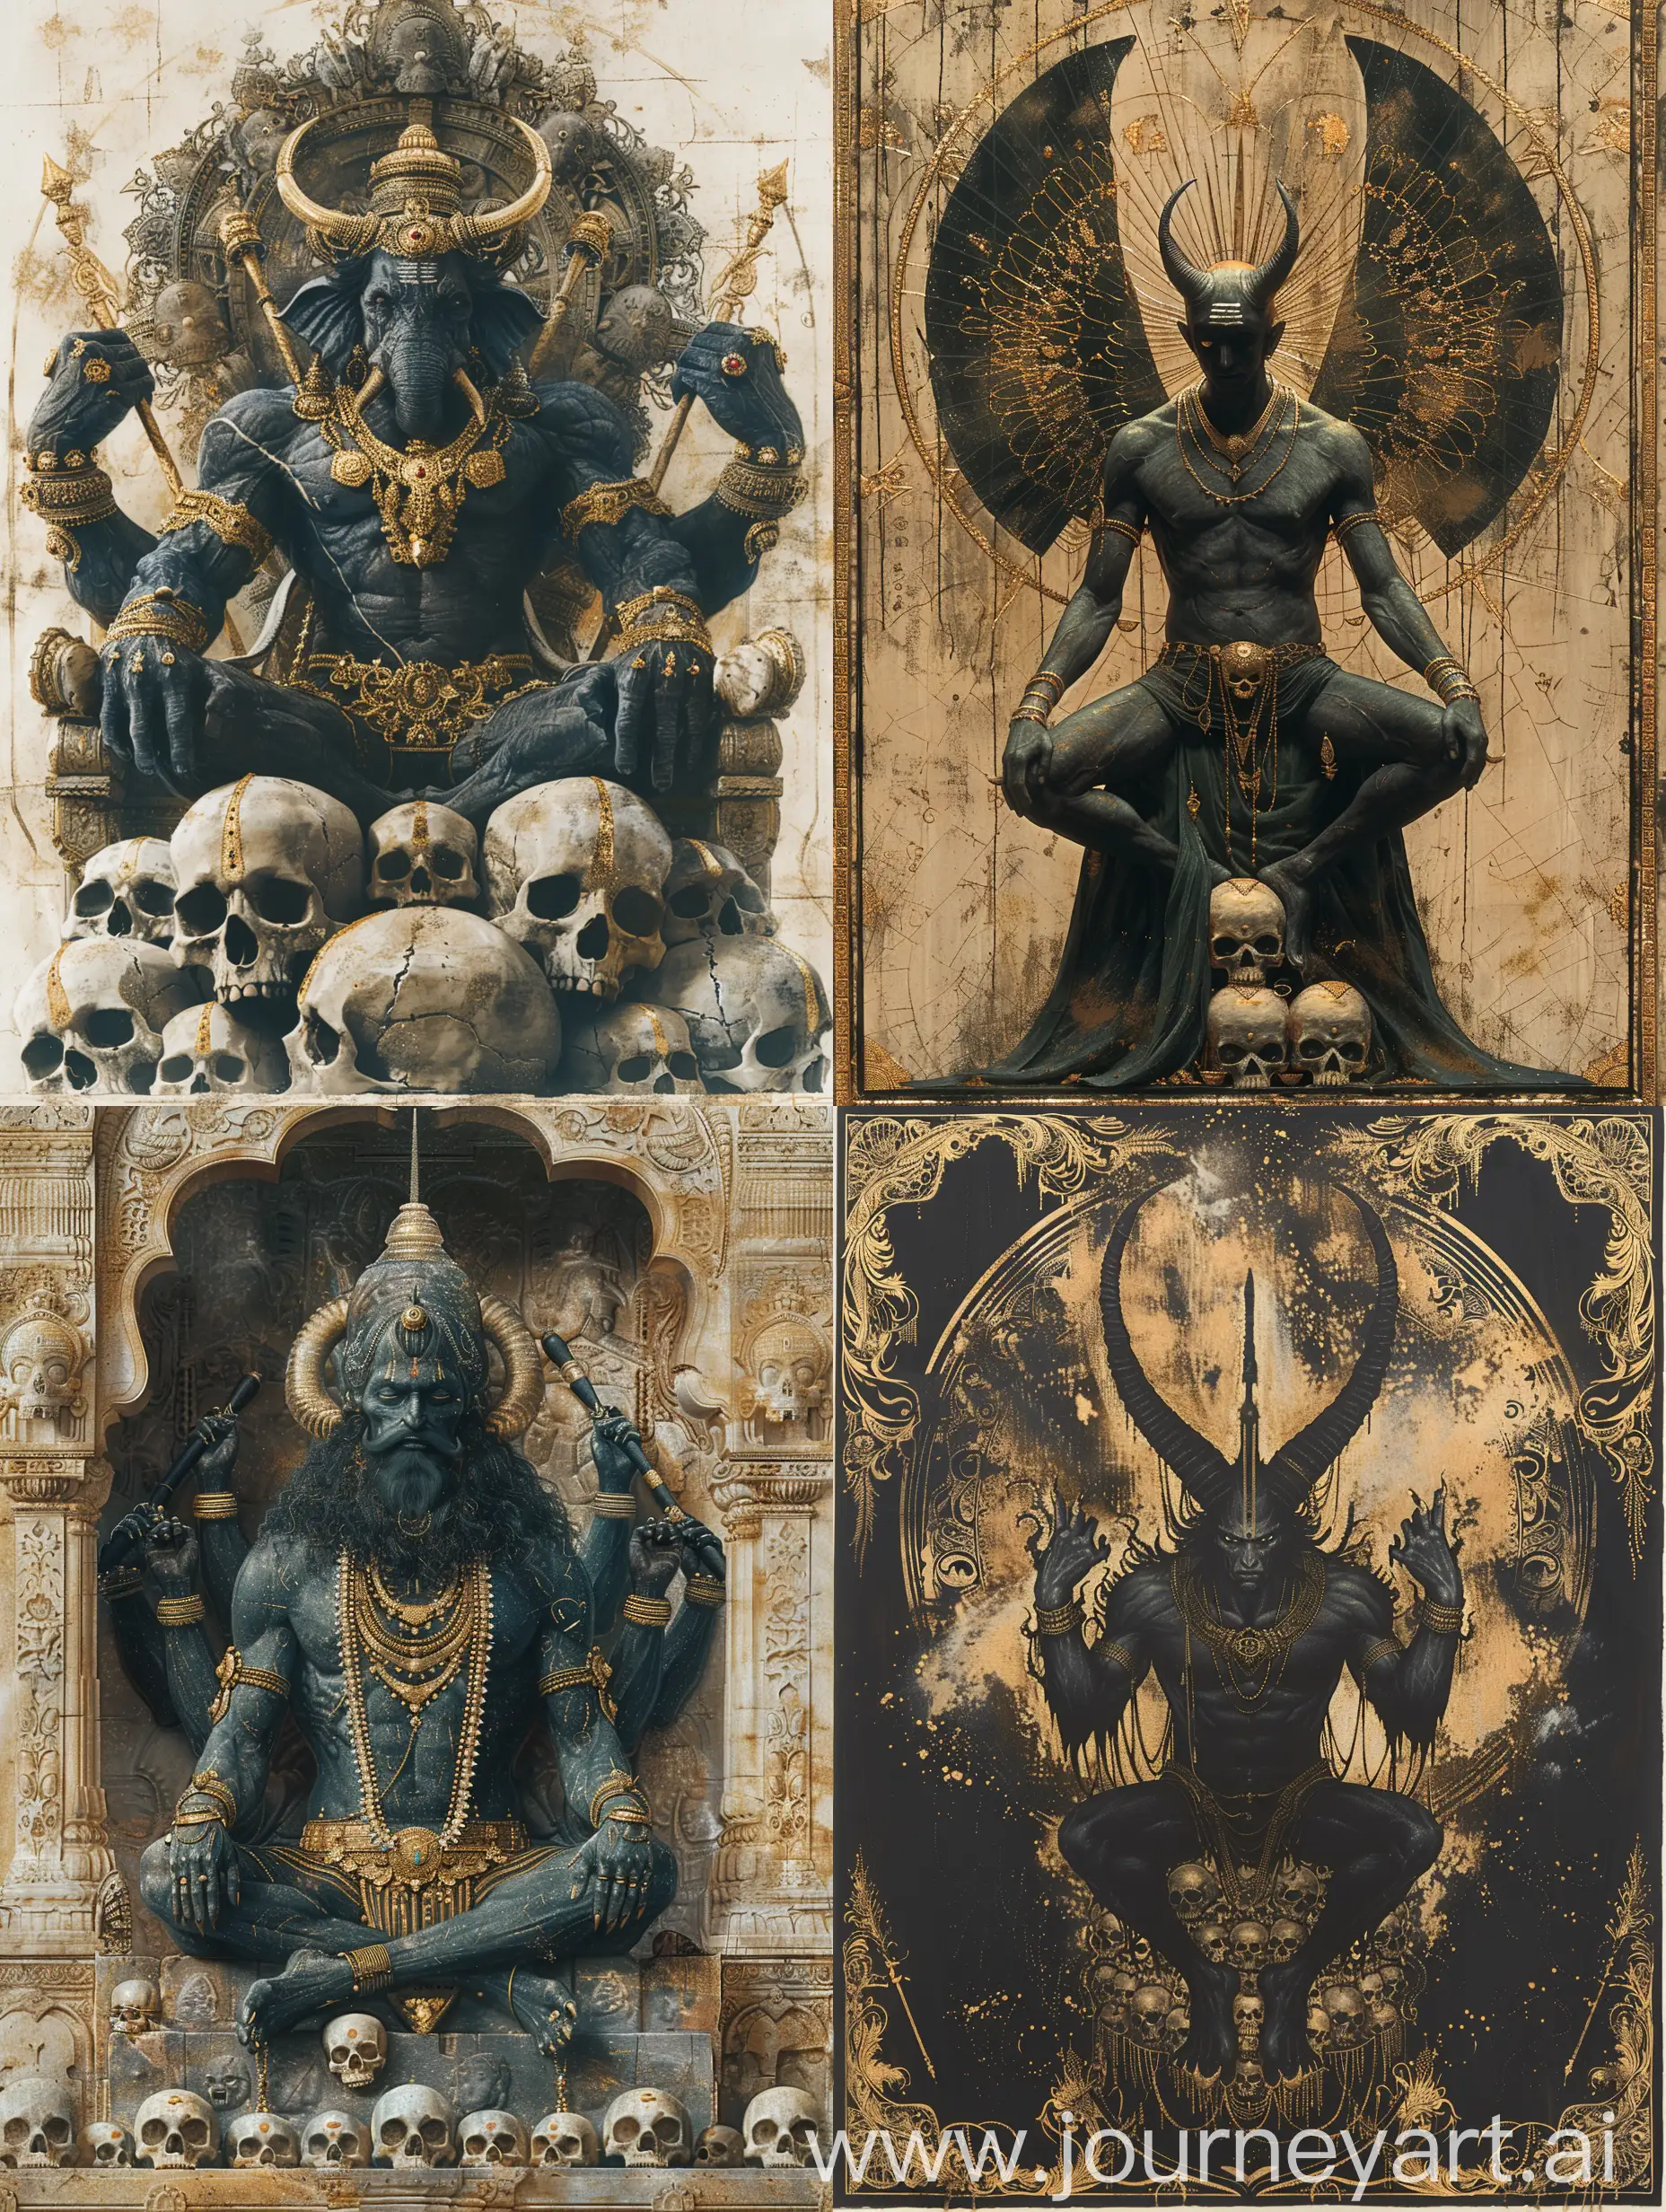  Dark, awe-inspiring God of Death, Ravana with horn, multi-armed, seated on a throne of skulls, ancient Indian mythos, Mughal miniature style painting with intricate gold filigree, Ramayana epoch, foreboding omniscient gaze --v 6 --ar 3:4 --s 650 --c 15